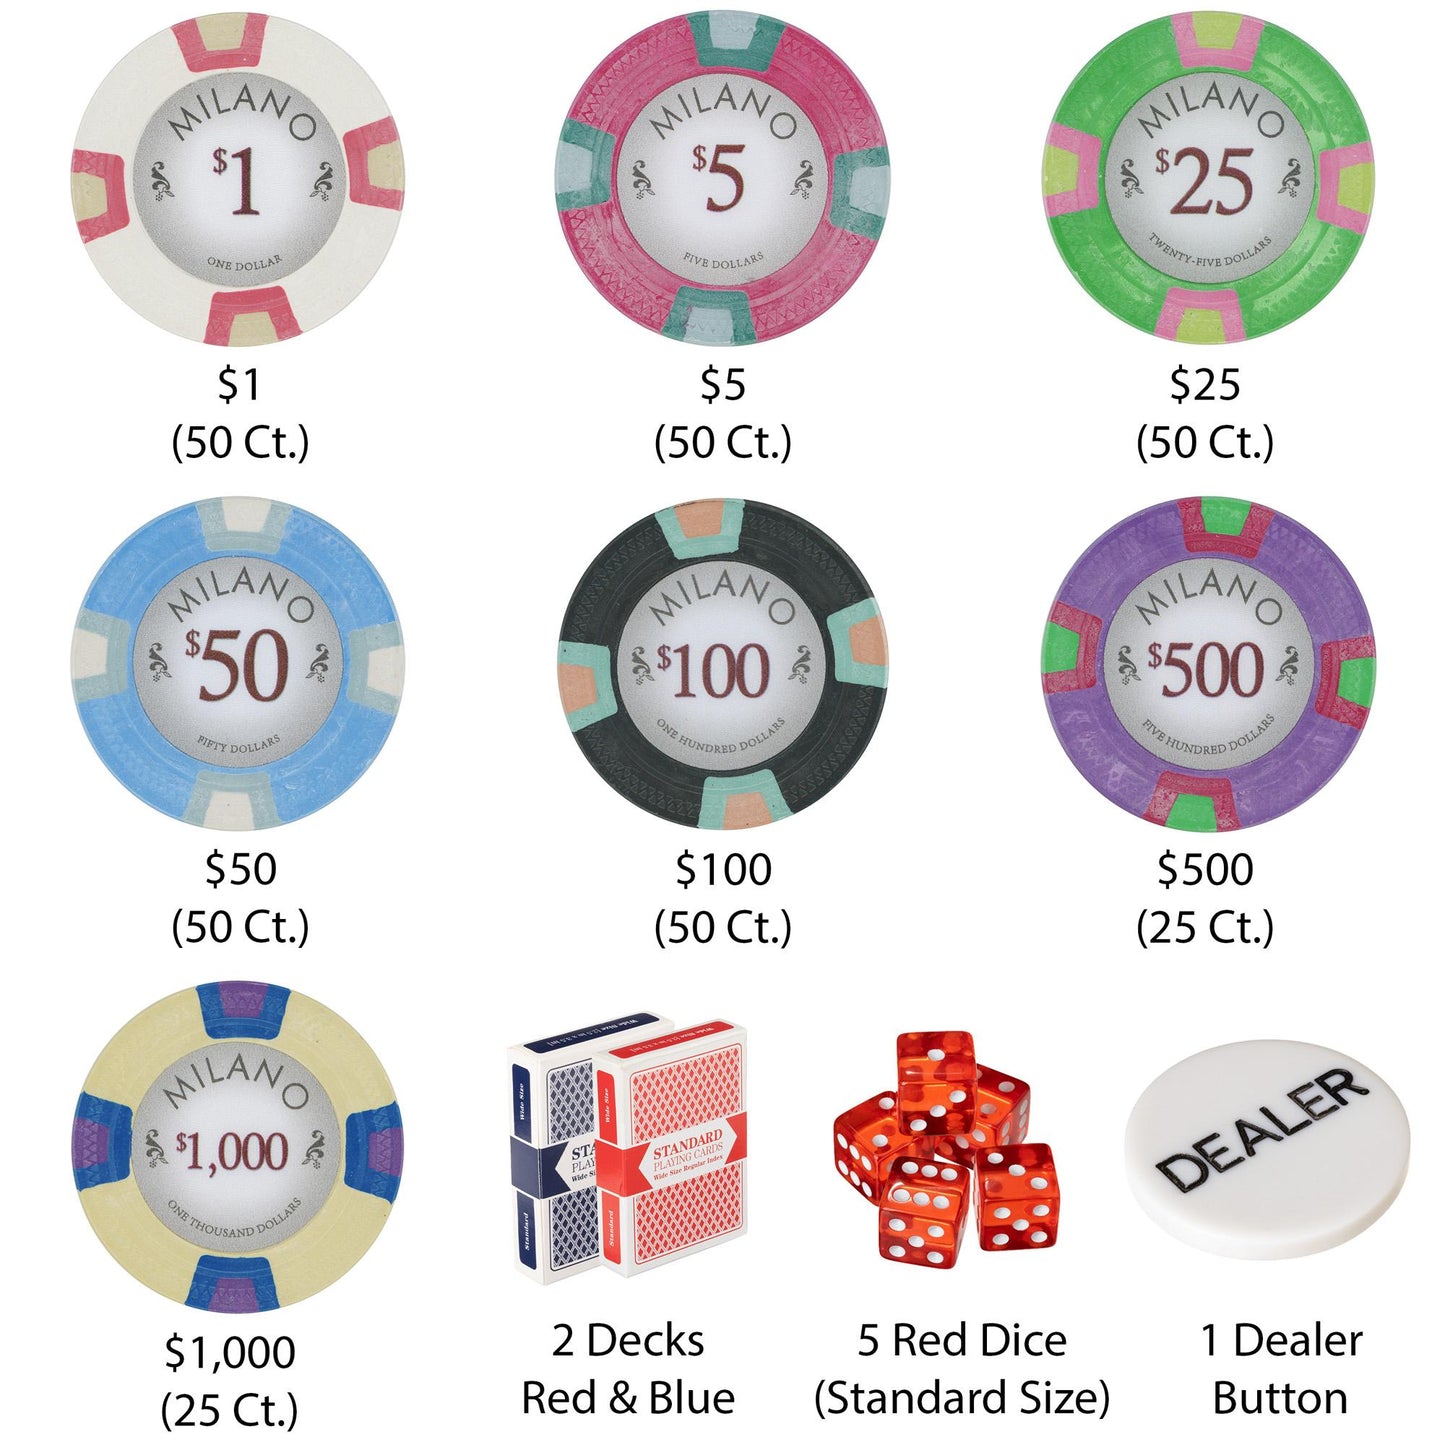 300 Milano Poker Chips with Aluminum Case